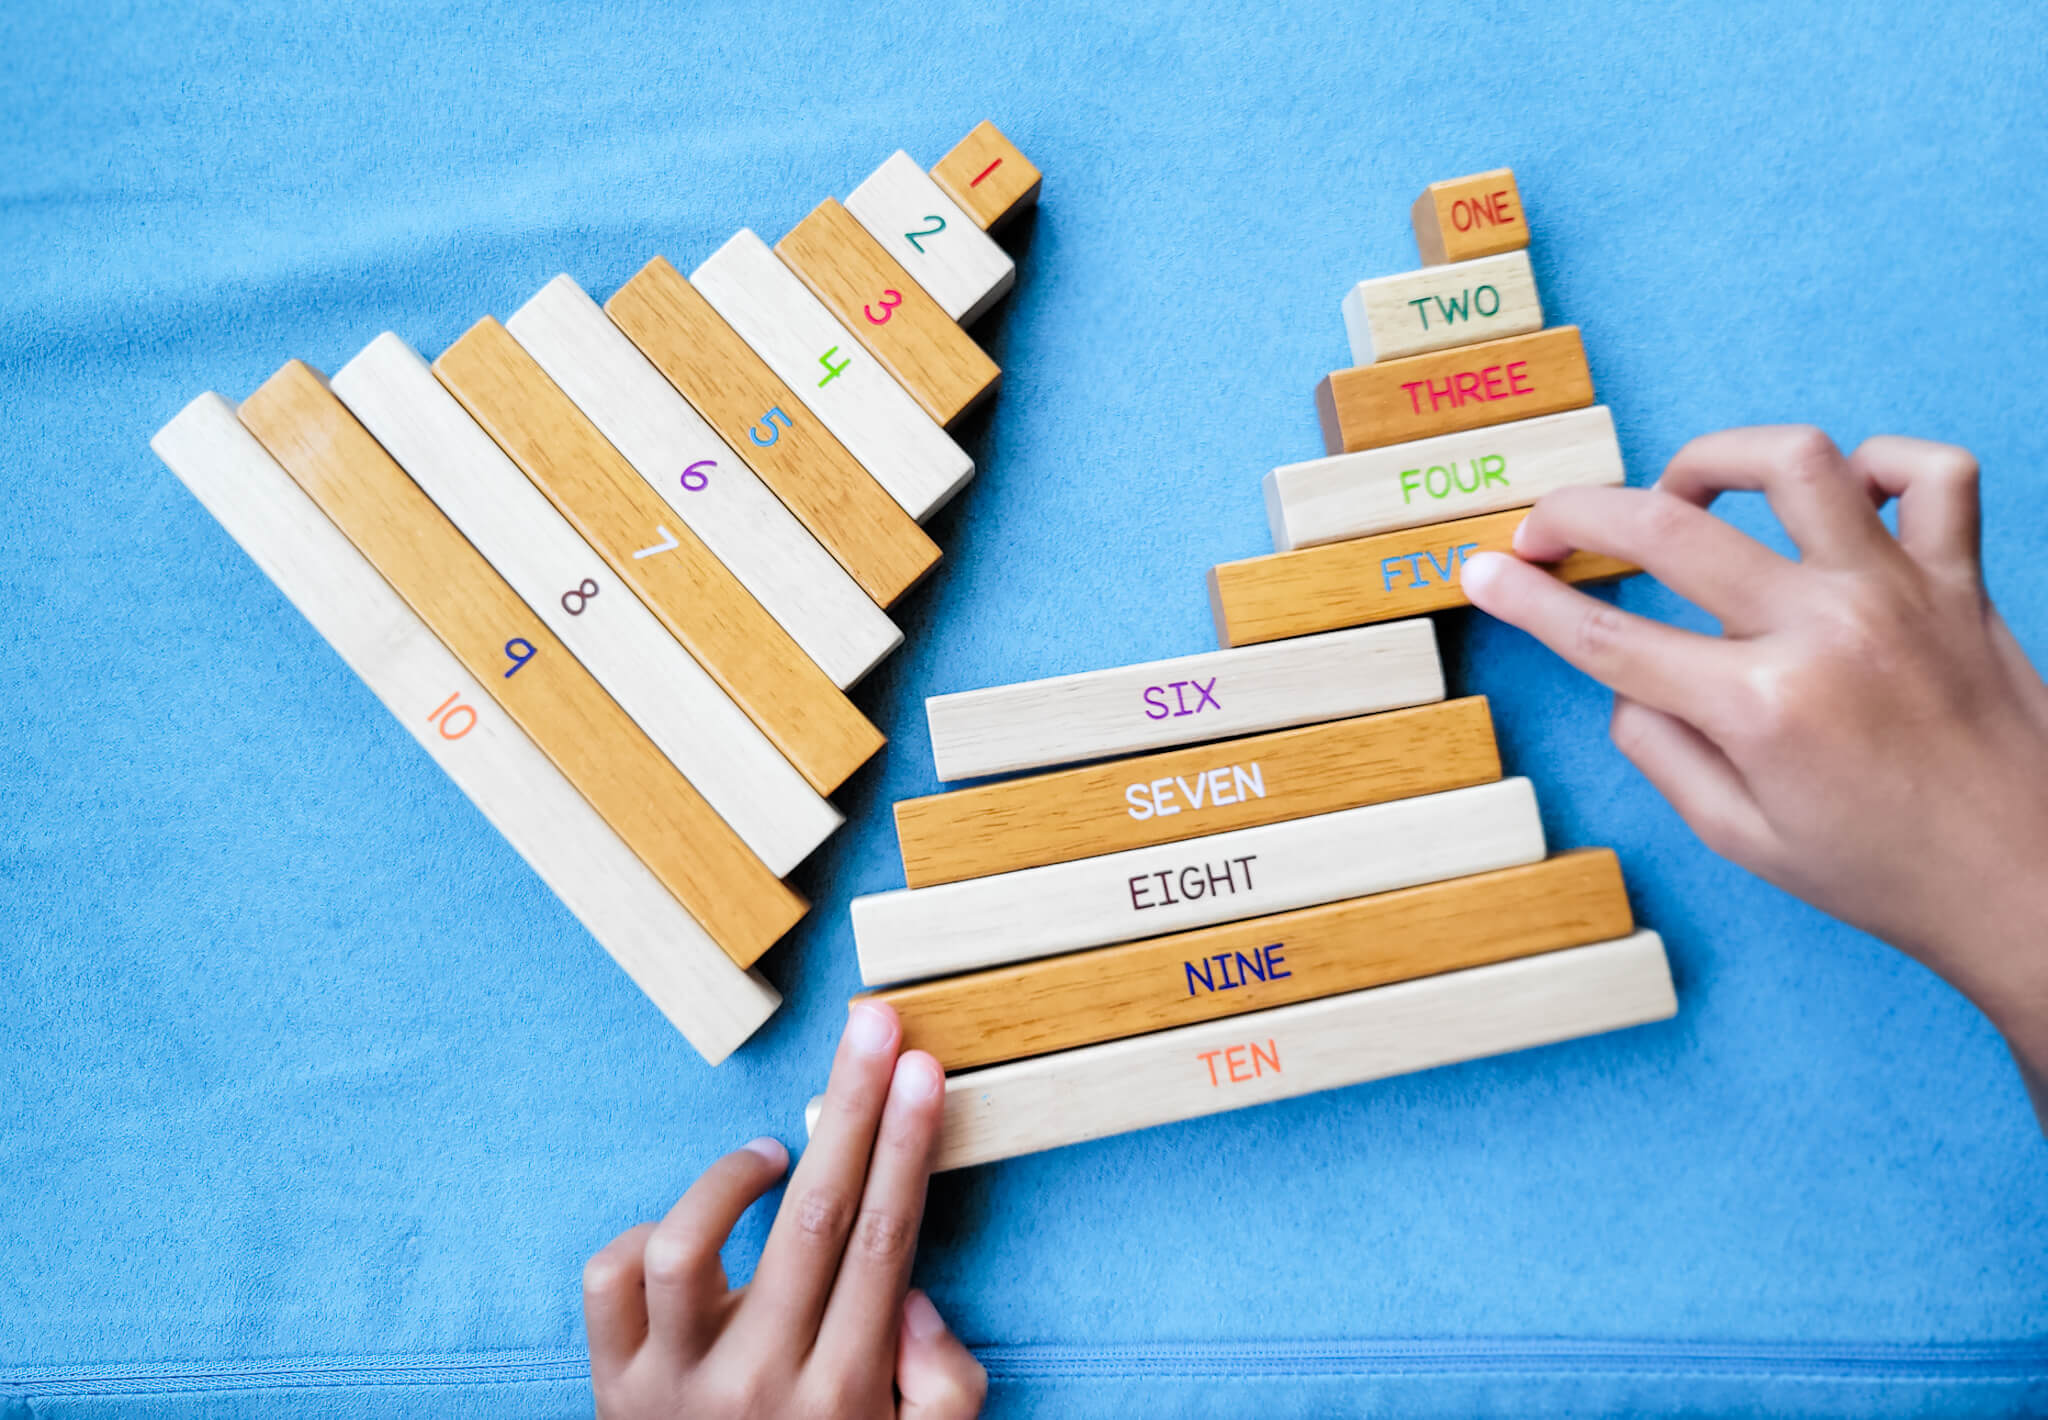 Matching digits with number names using wooden rods by Little Bud Kids